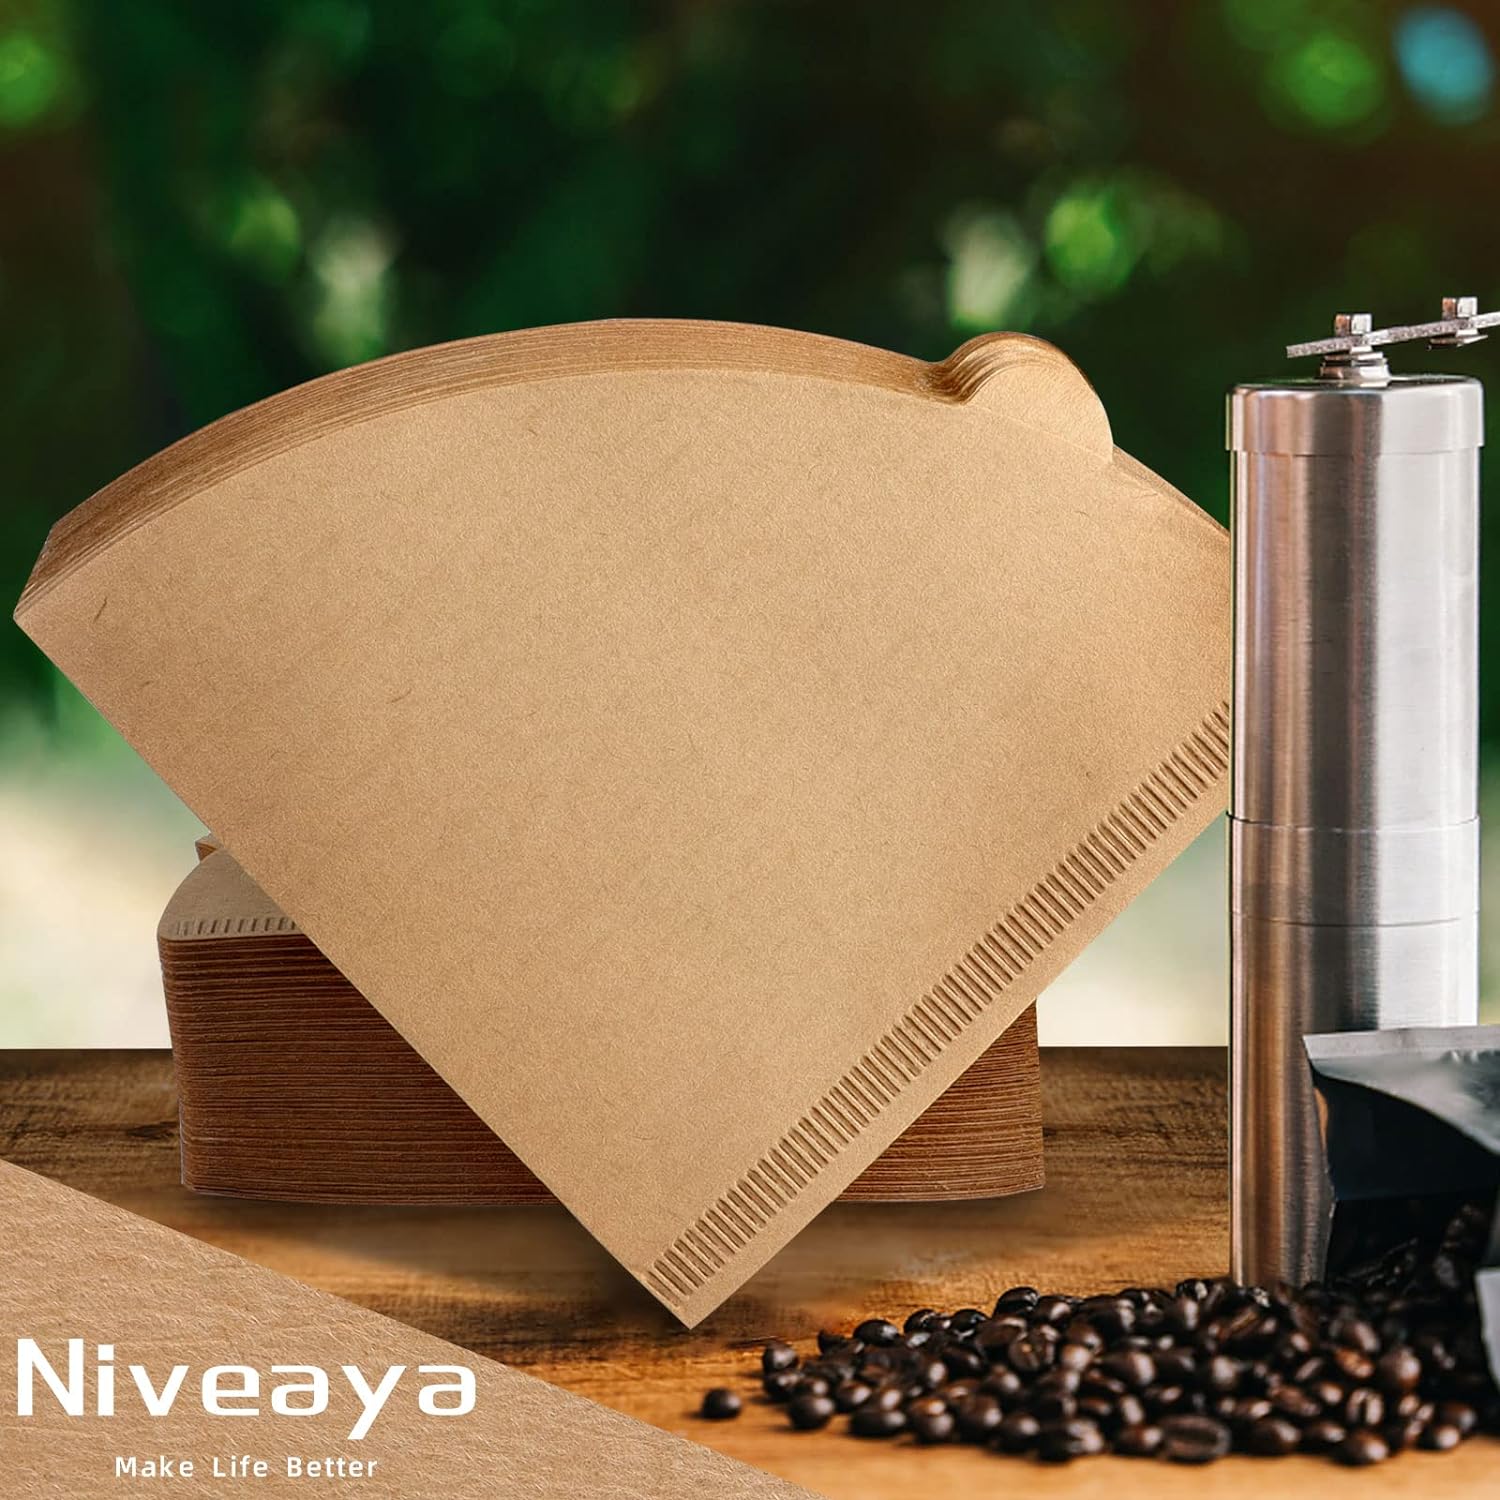 Niveaya 200 Count Coffee Filters - Size 02, Natural Paper Coffee Filter, No Blowout, Disposable for Pour Over and Drip Coffee Maker (2-4 Cup)